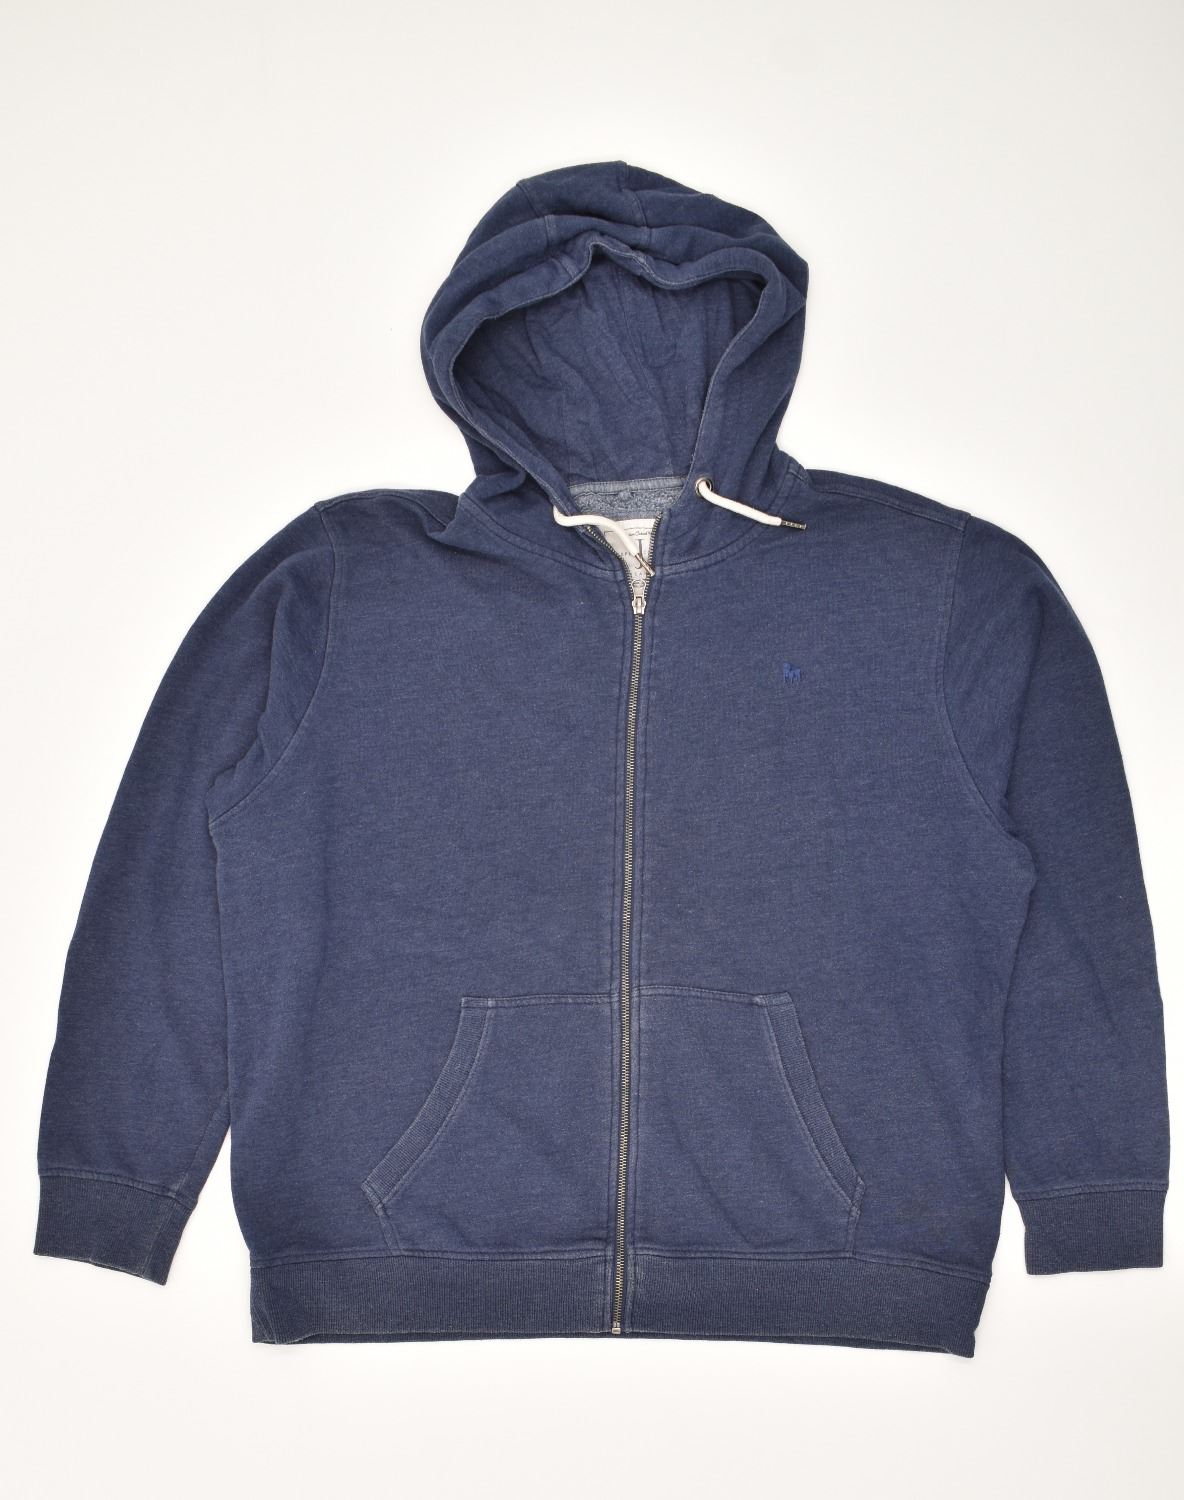 Pull homme coton marque DB taille XL